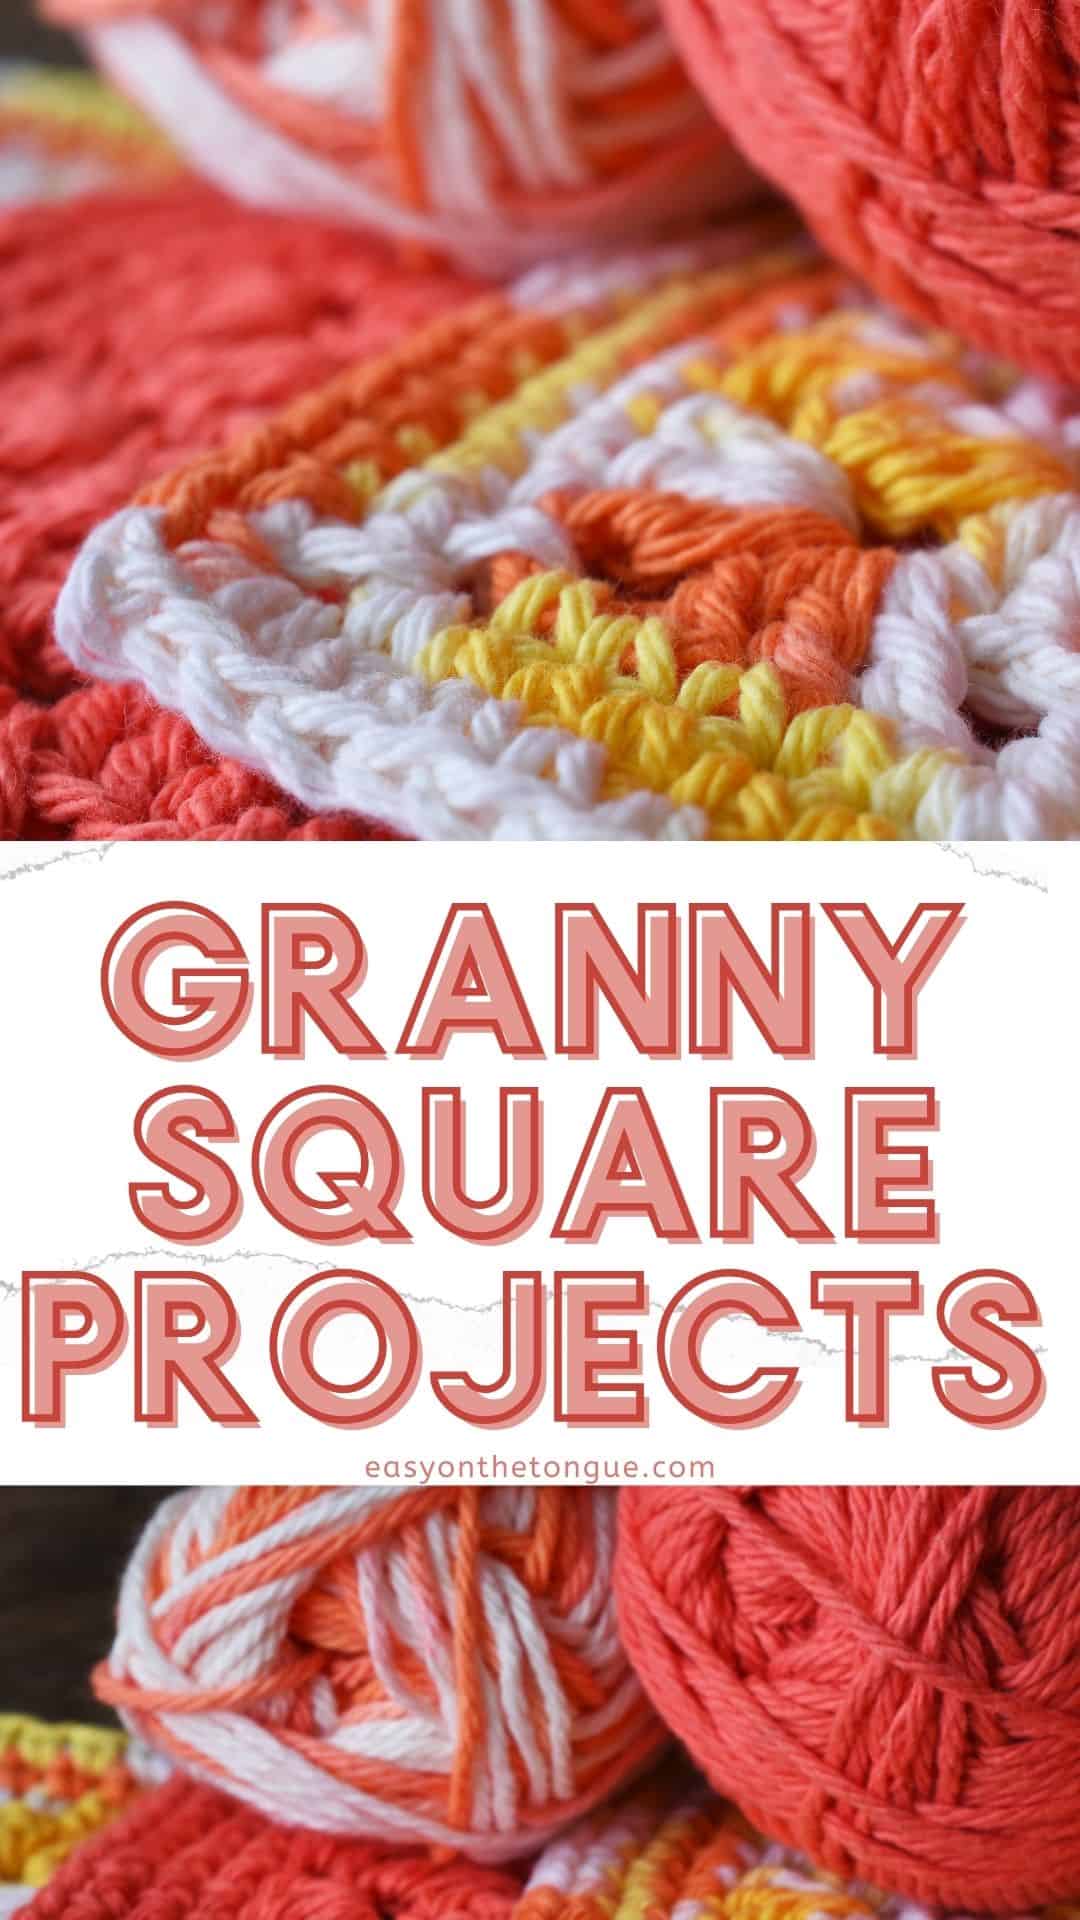 Granny Square projects listed by Easy on the Tongue 25 Granny Square Projects you can make today!